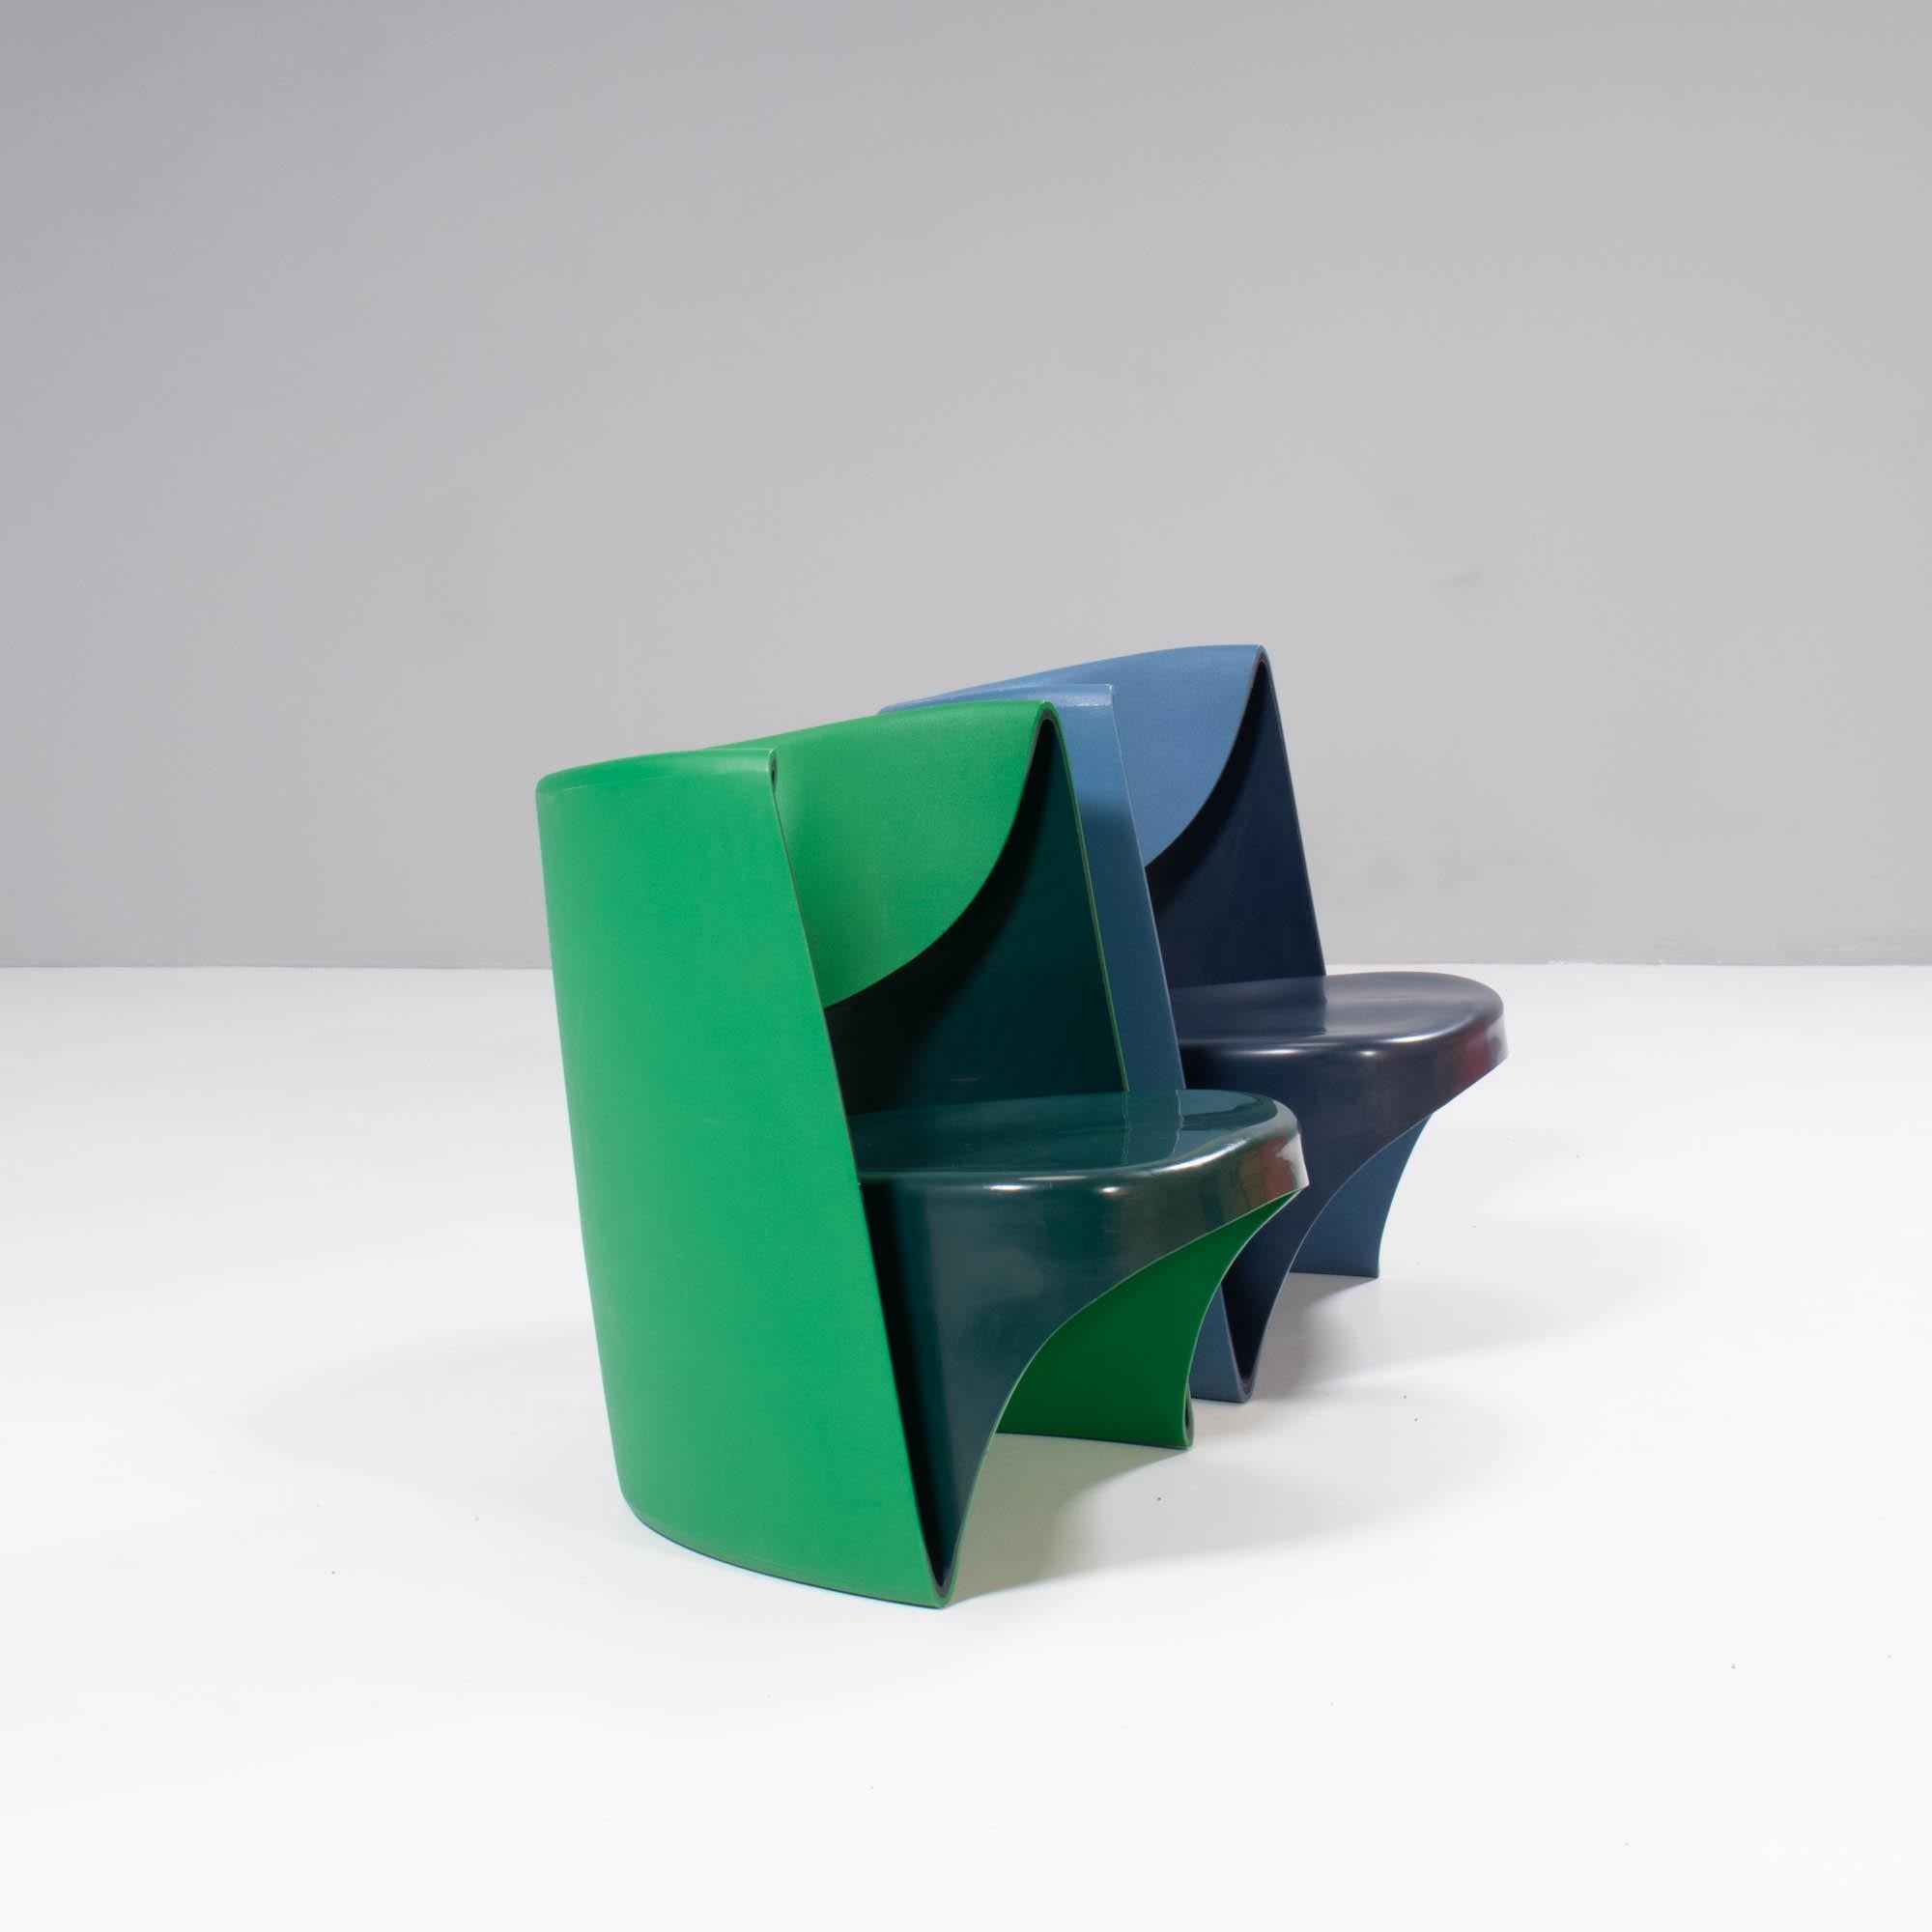 Designed by Ron Arad for Cappellini in 2002, the ‘Nino Rota’ chair is named after the famous Italian composer.

Constructed from twin walled moulded plastic, the chairs have a rounded silhouette with a textured outer shell and smooth interior and